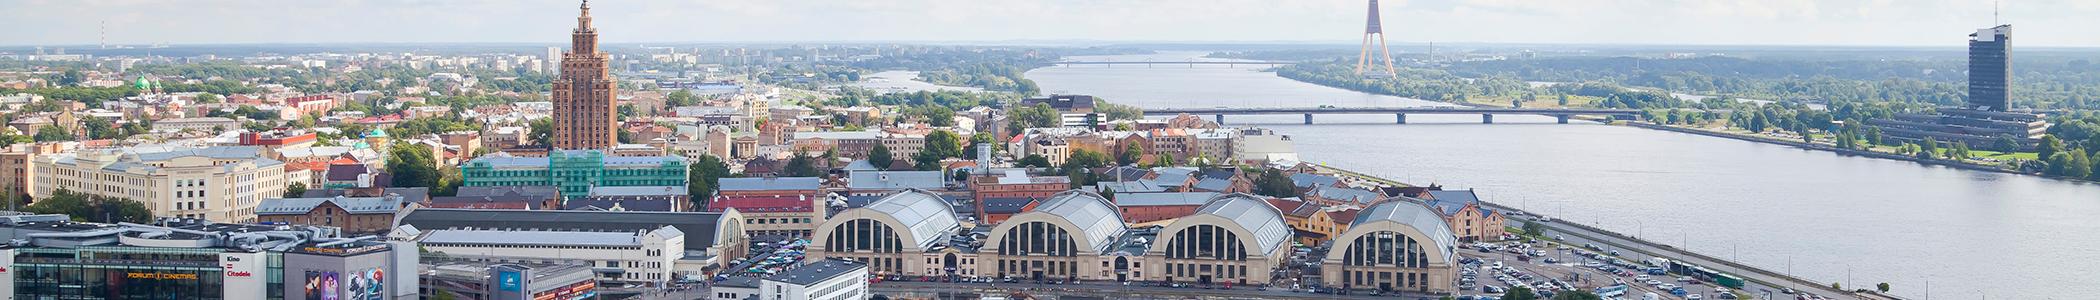 Banner image for Riga on GigsGuide